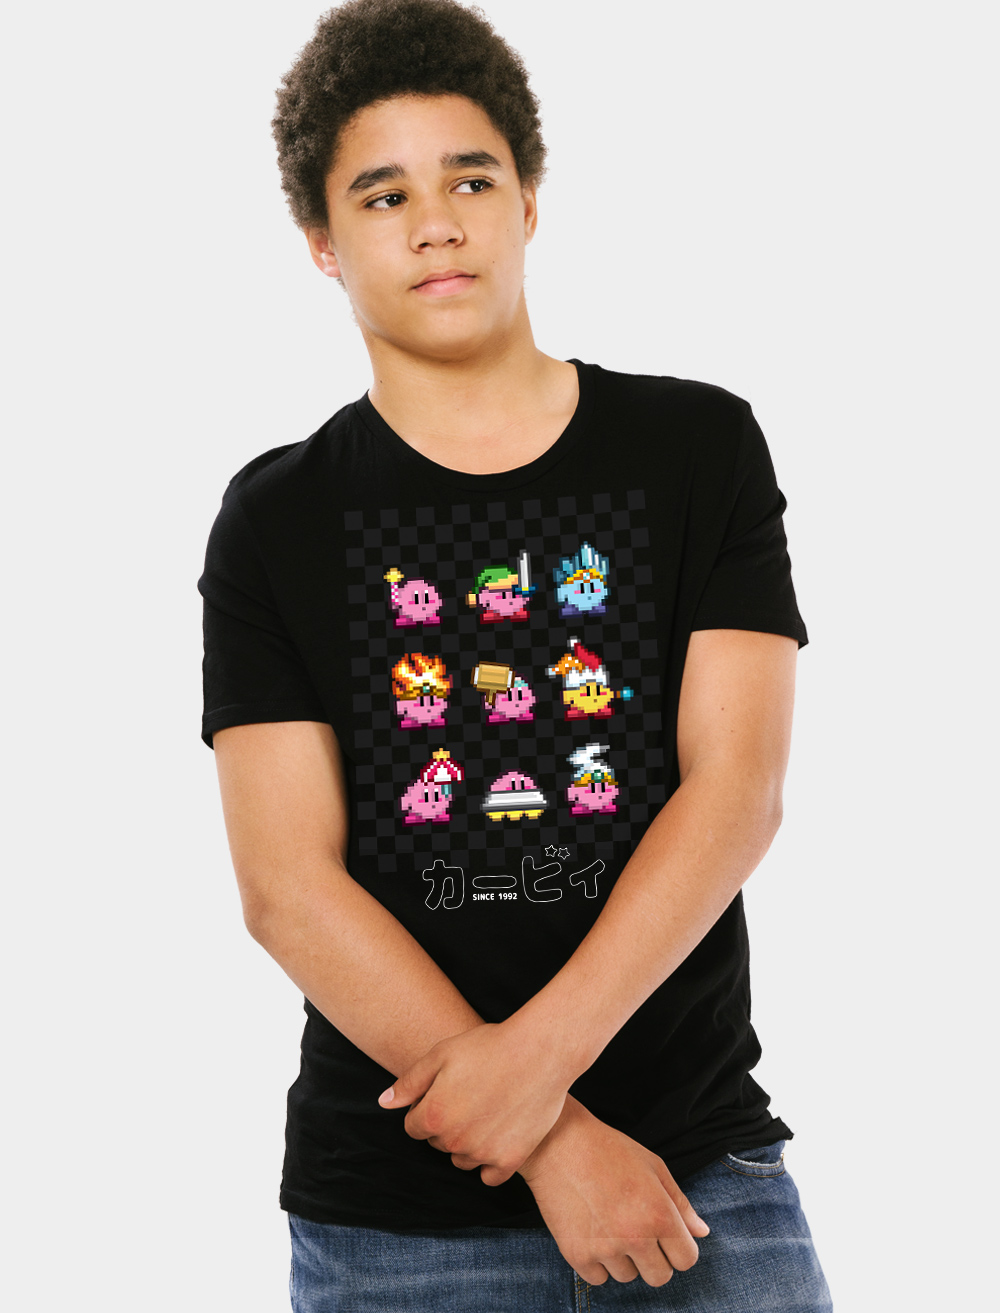 product-image-kirby-shirt-copy-ability-tee-model2